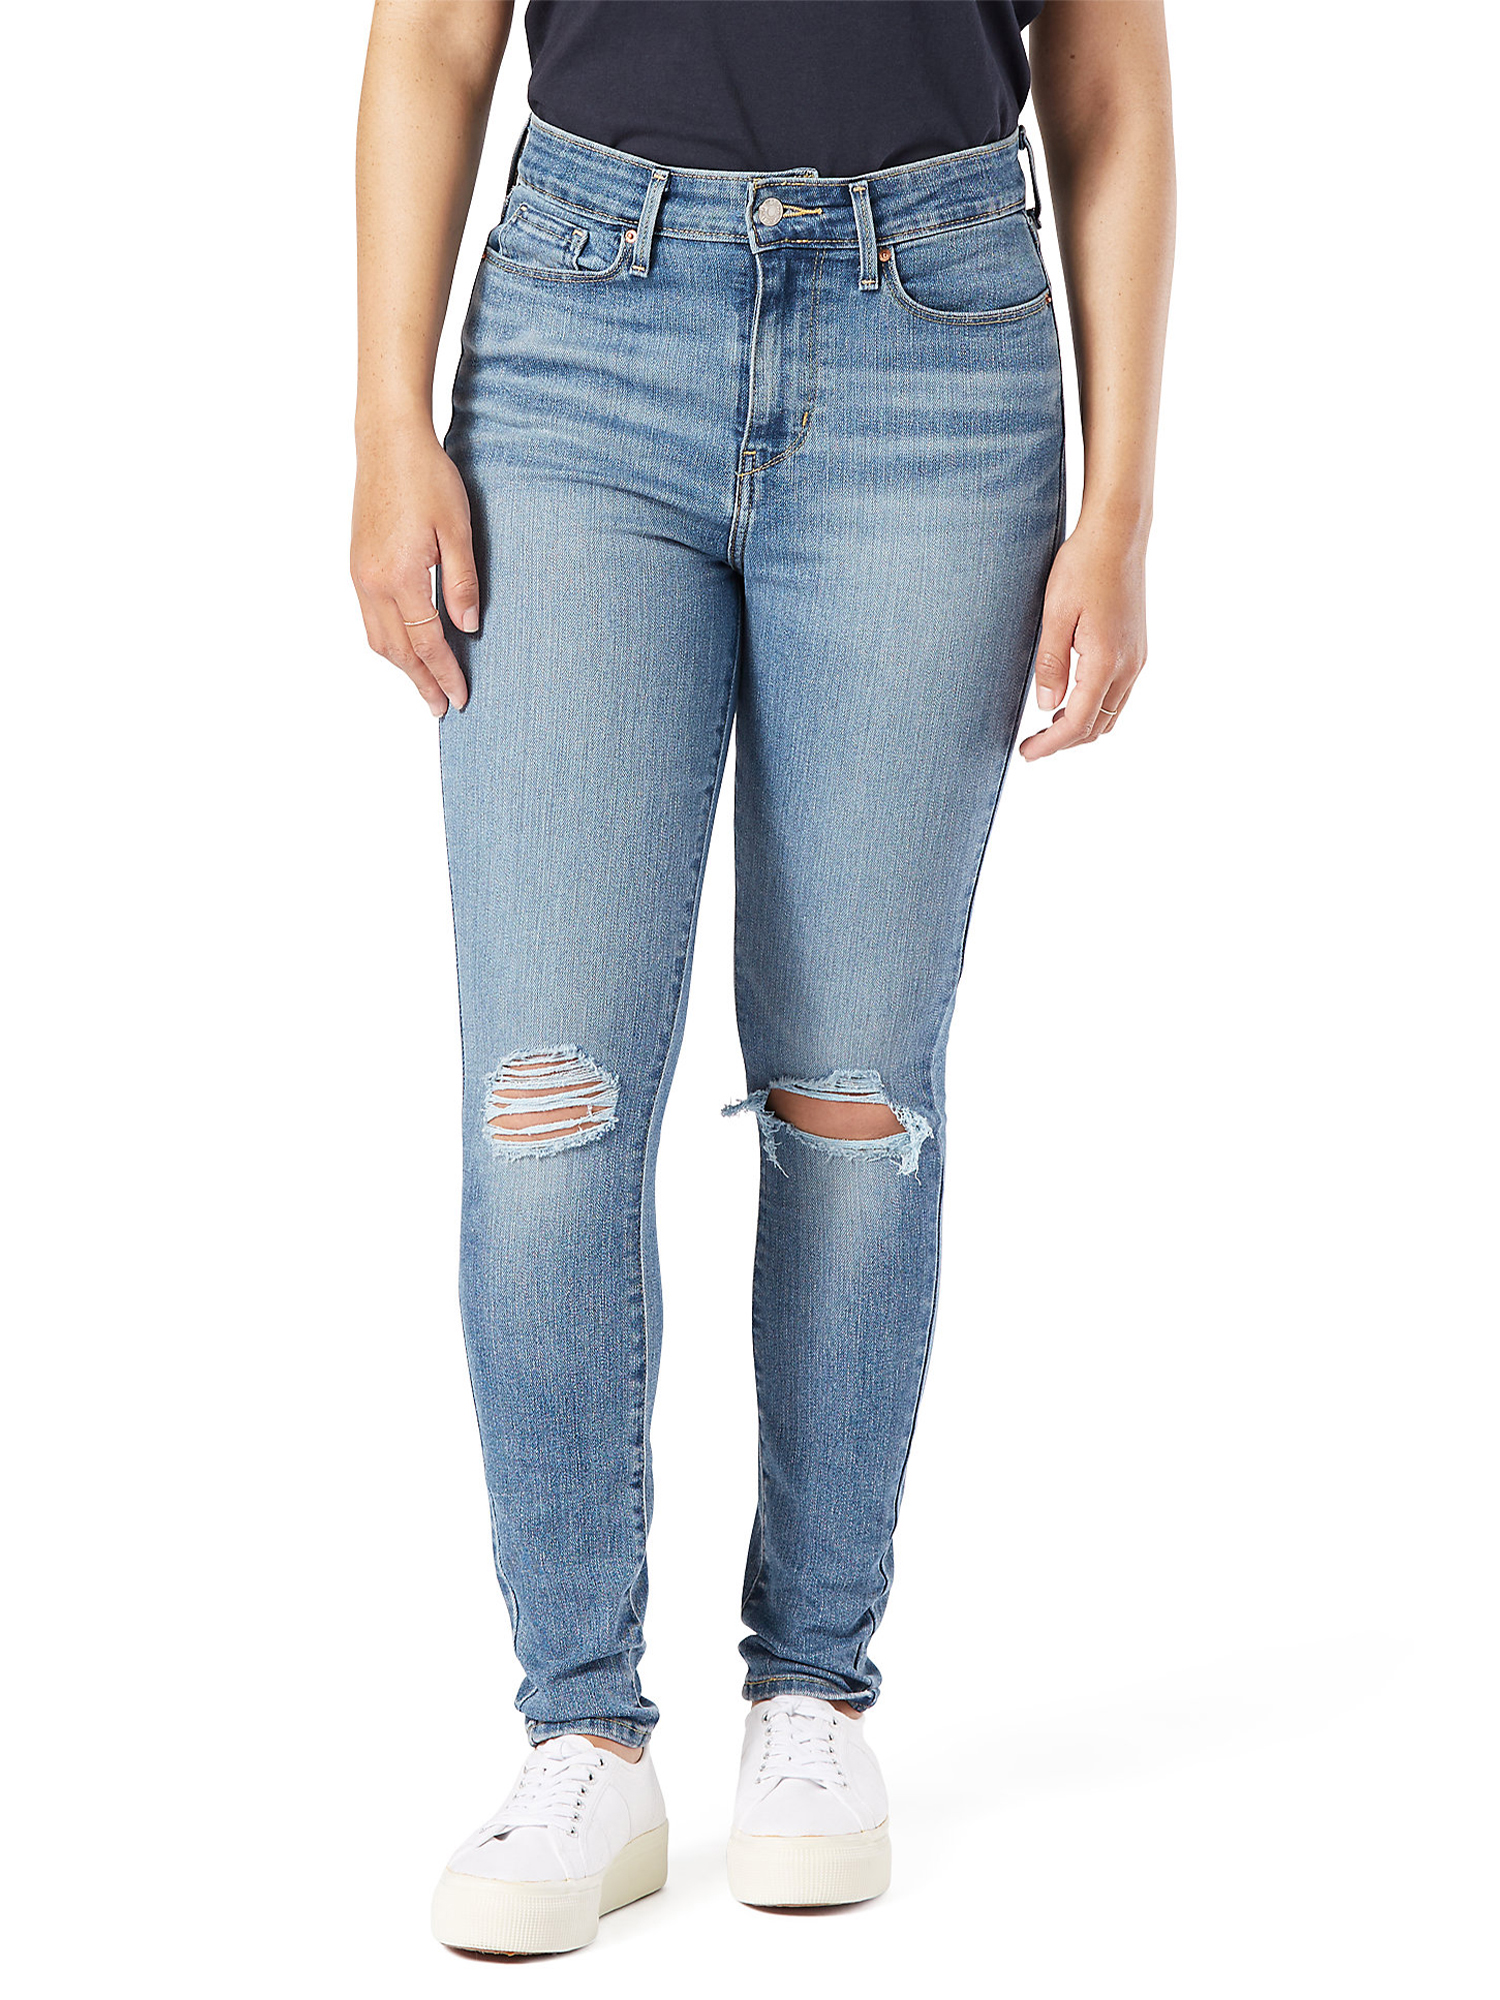 Signature by Levi Strauss & Co. Women's and Women's Plus High Rise ...